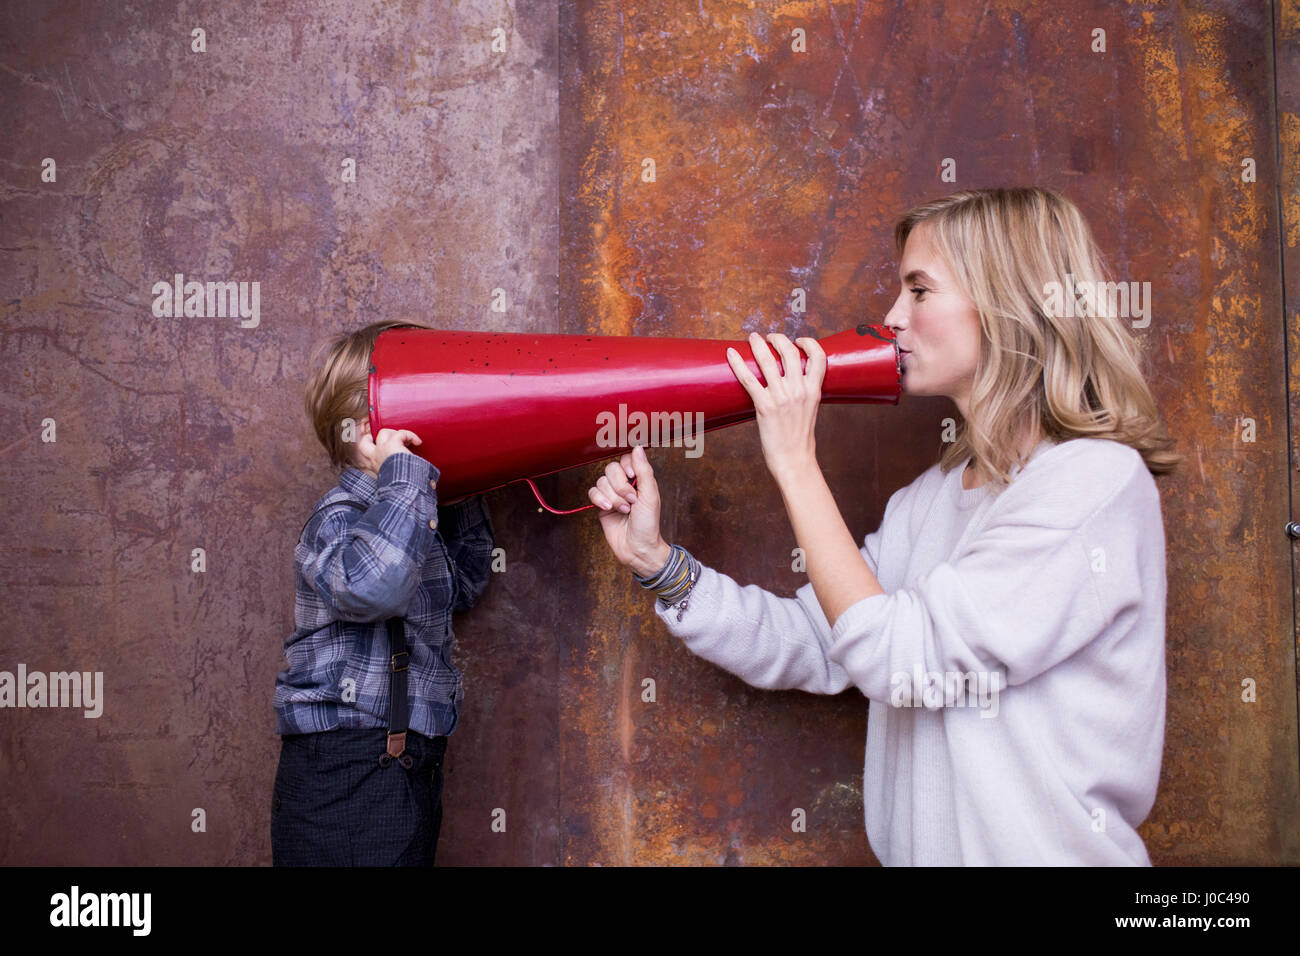 Woman speaking into megaphone, young boy listening, head in megaphone Stock Photo